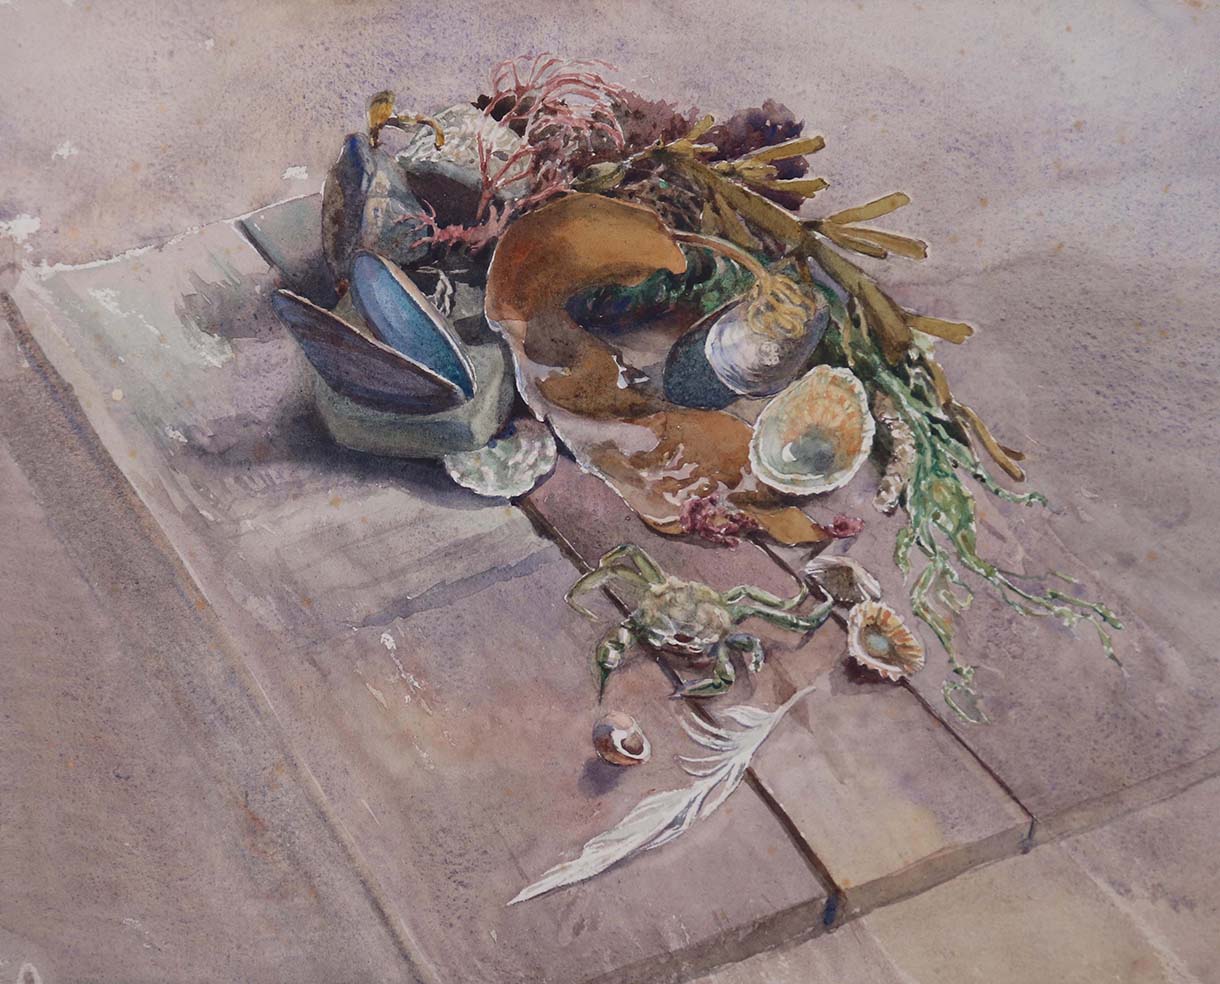 Judith Ackland's watercolour of a variety of seashells